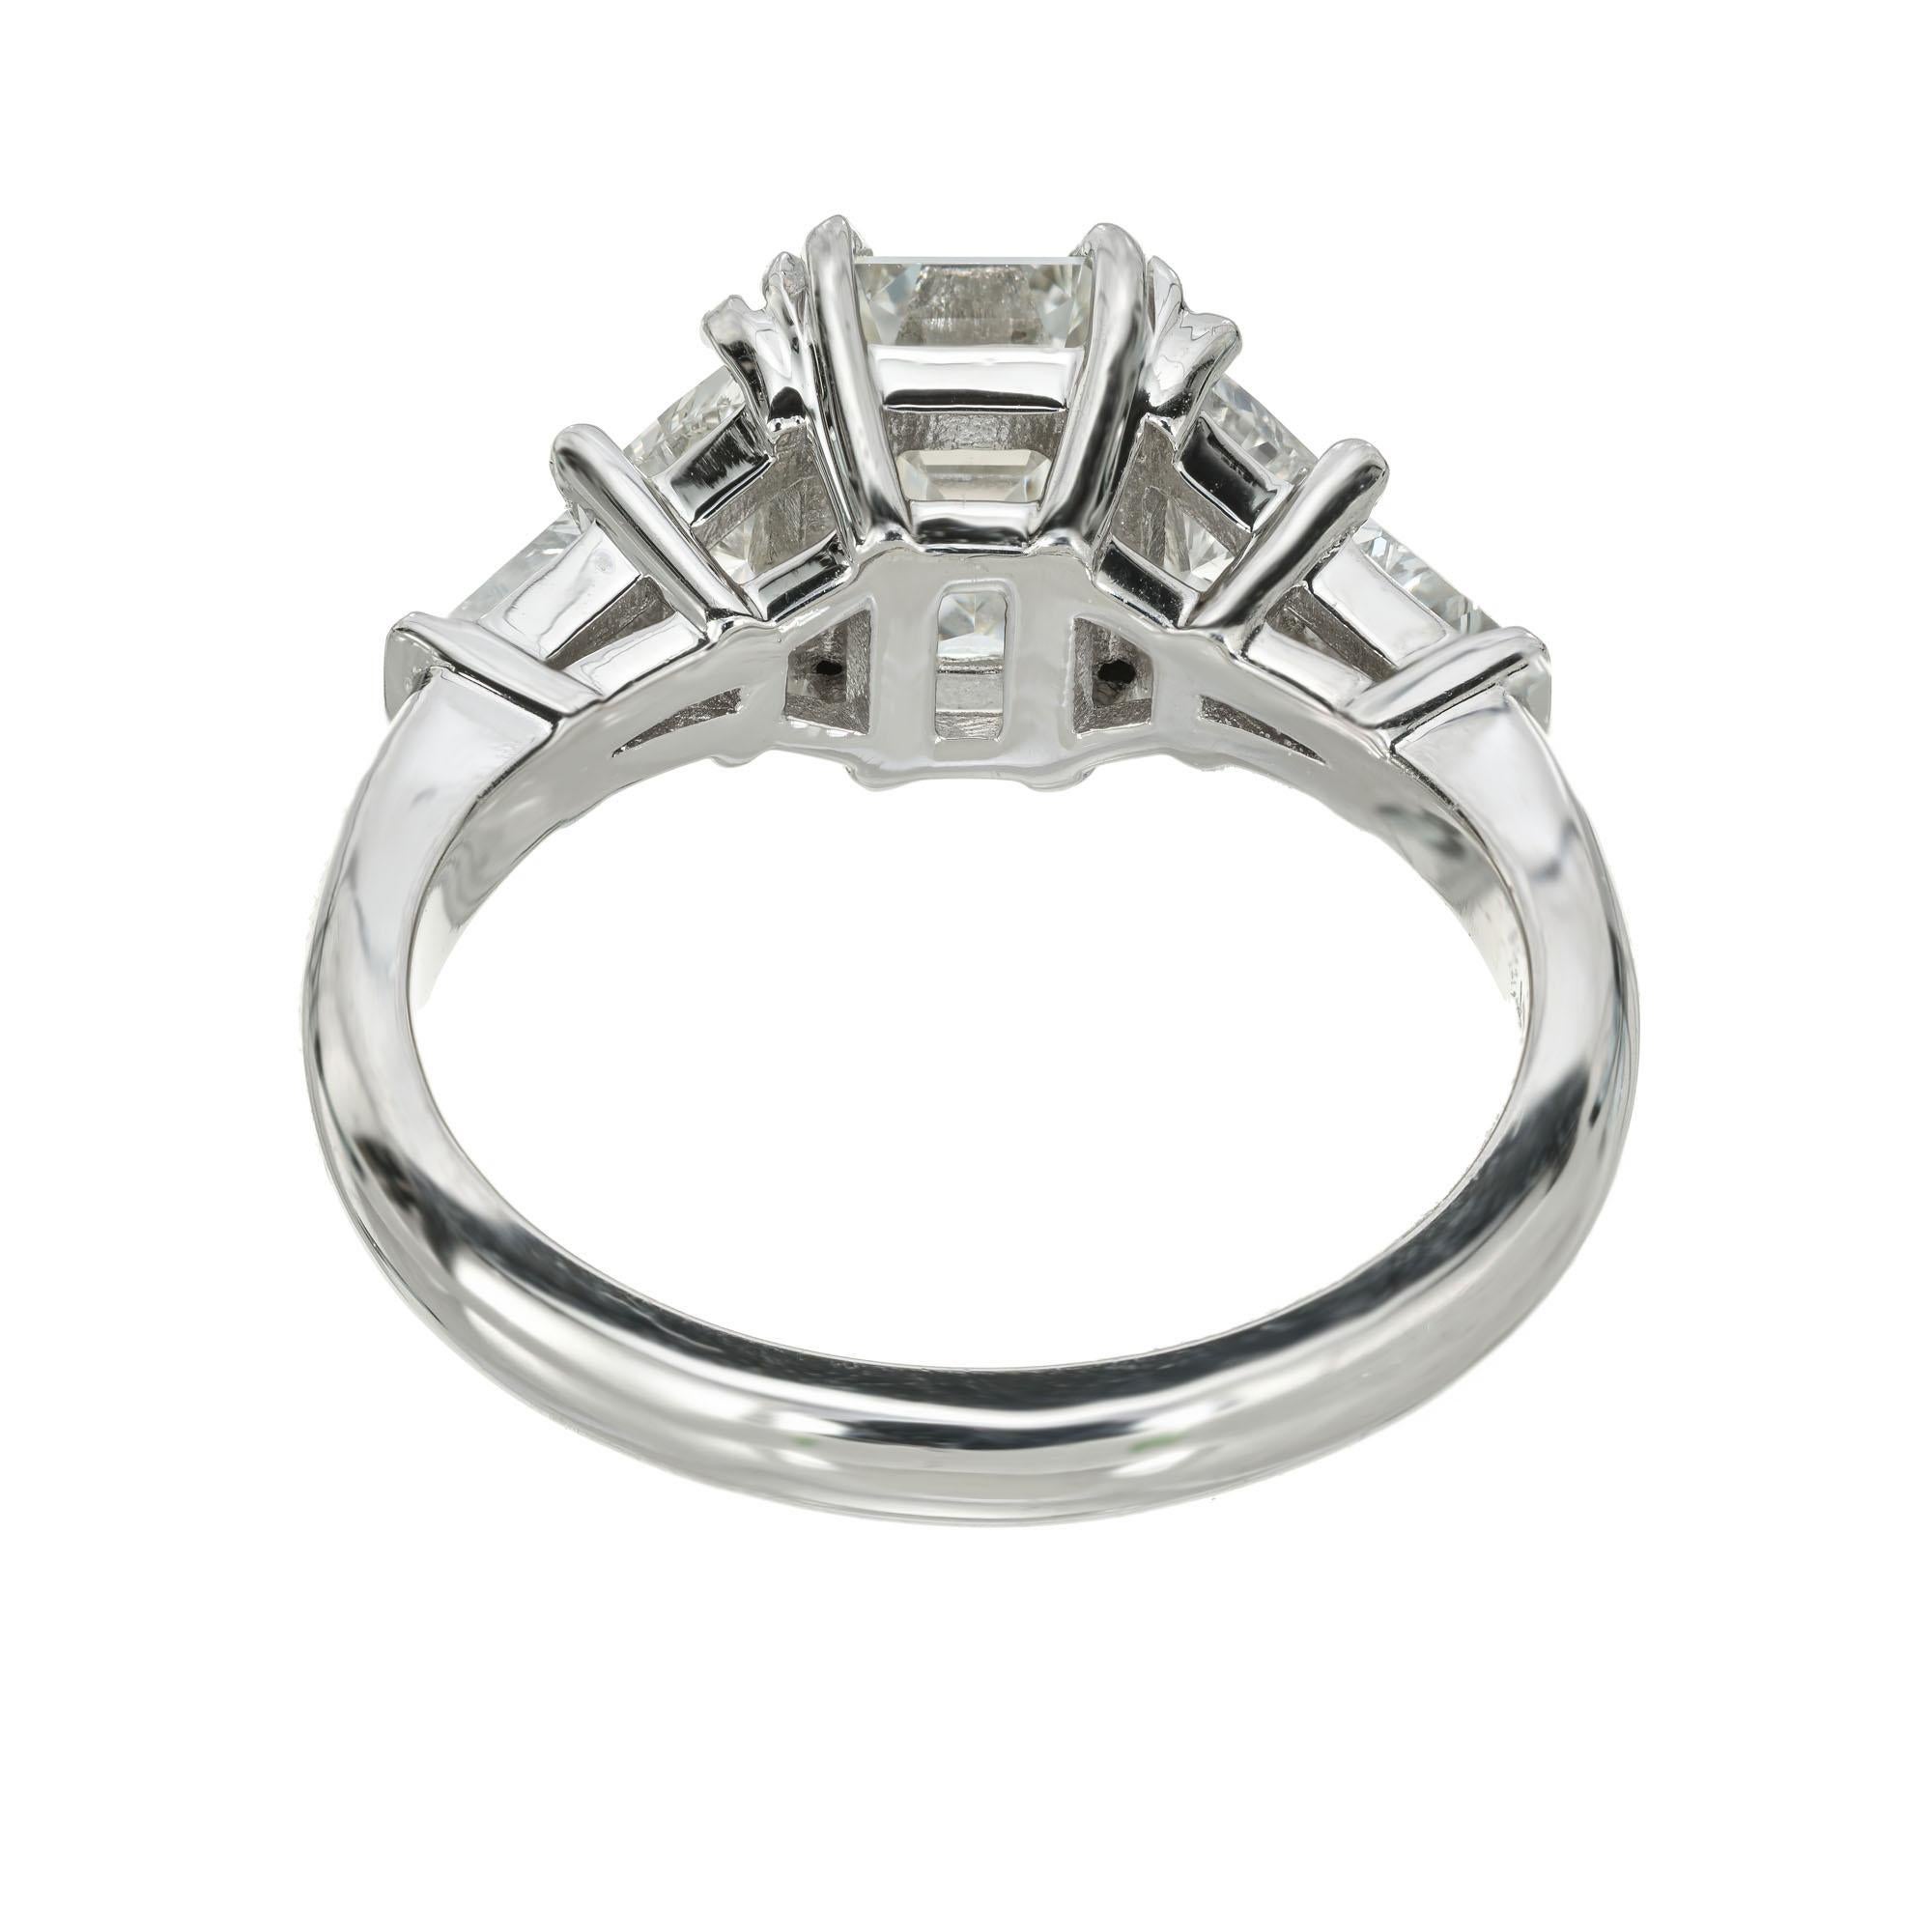 Peter Suchy 1.70 Carat GIA Cert Diamond Platinum Engagement Ring In Good Condition For Sale In Stamford, CT